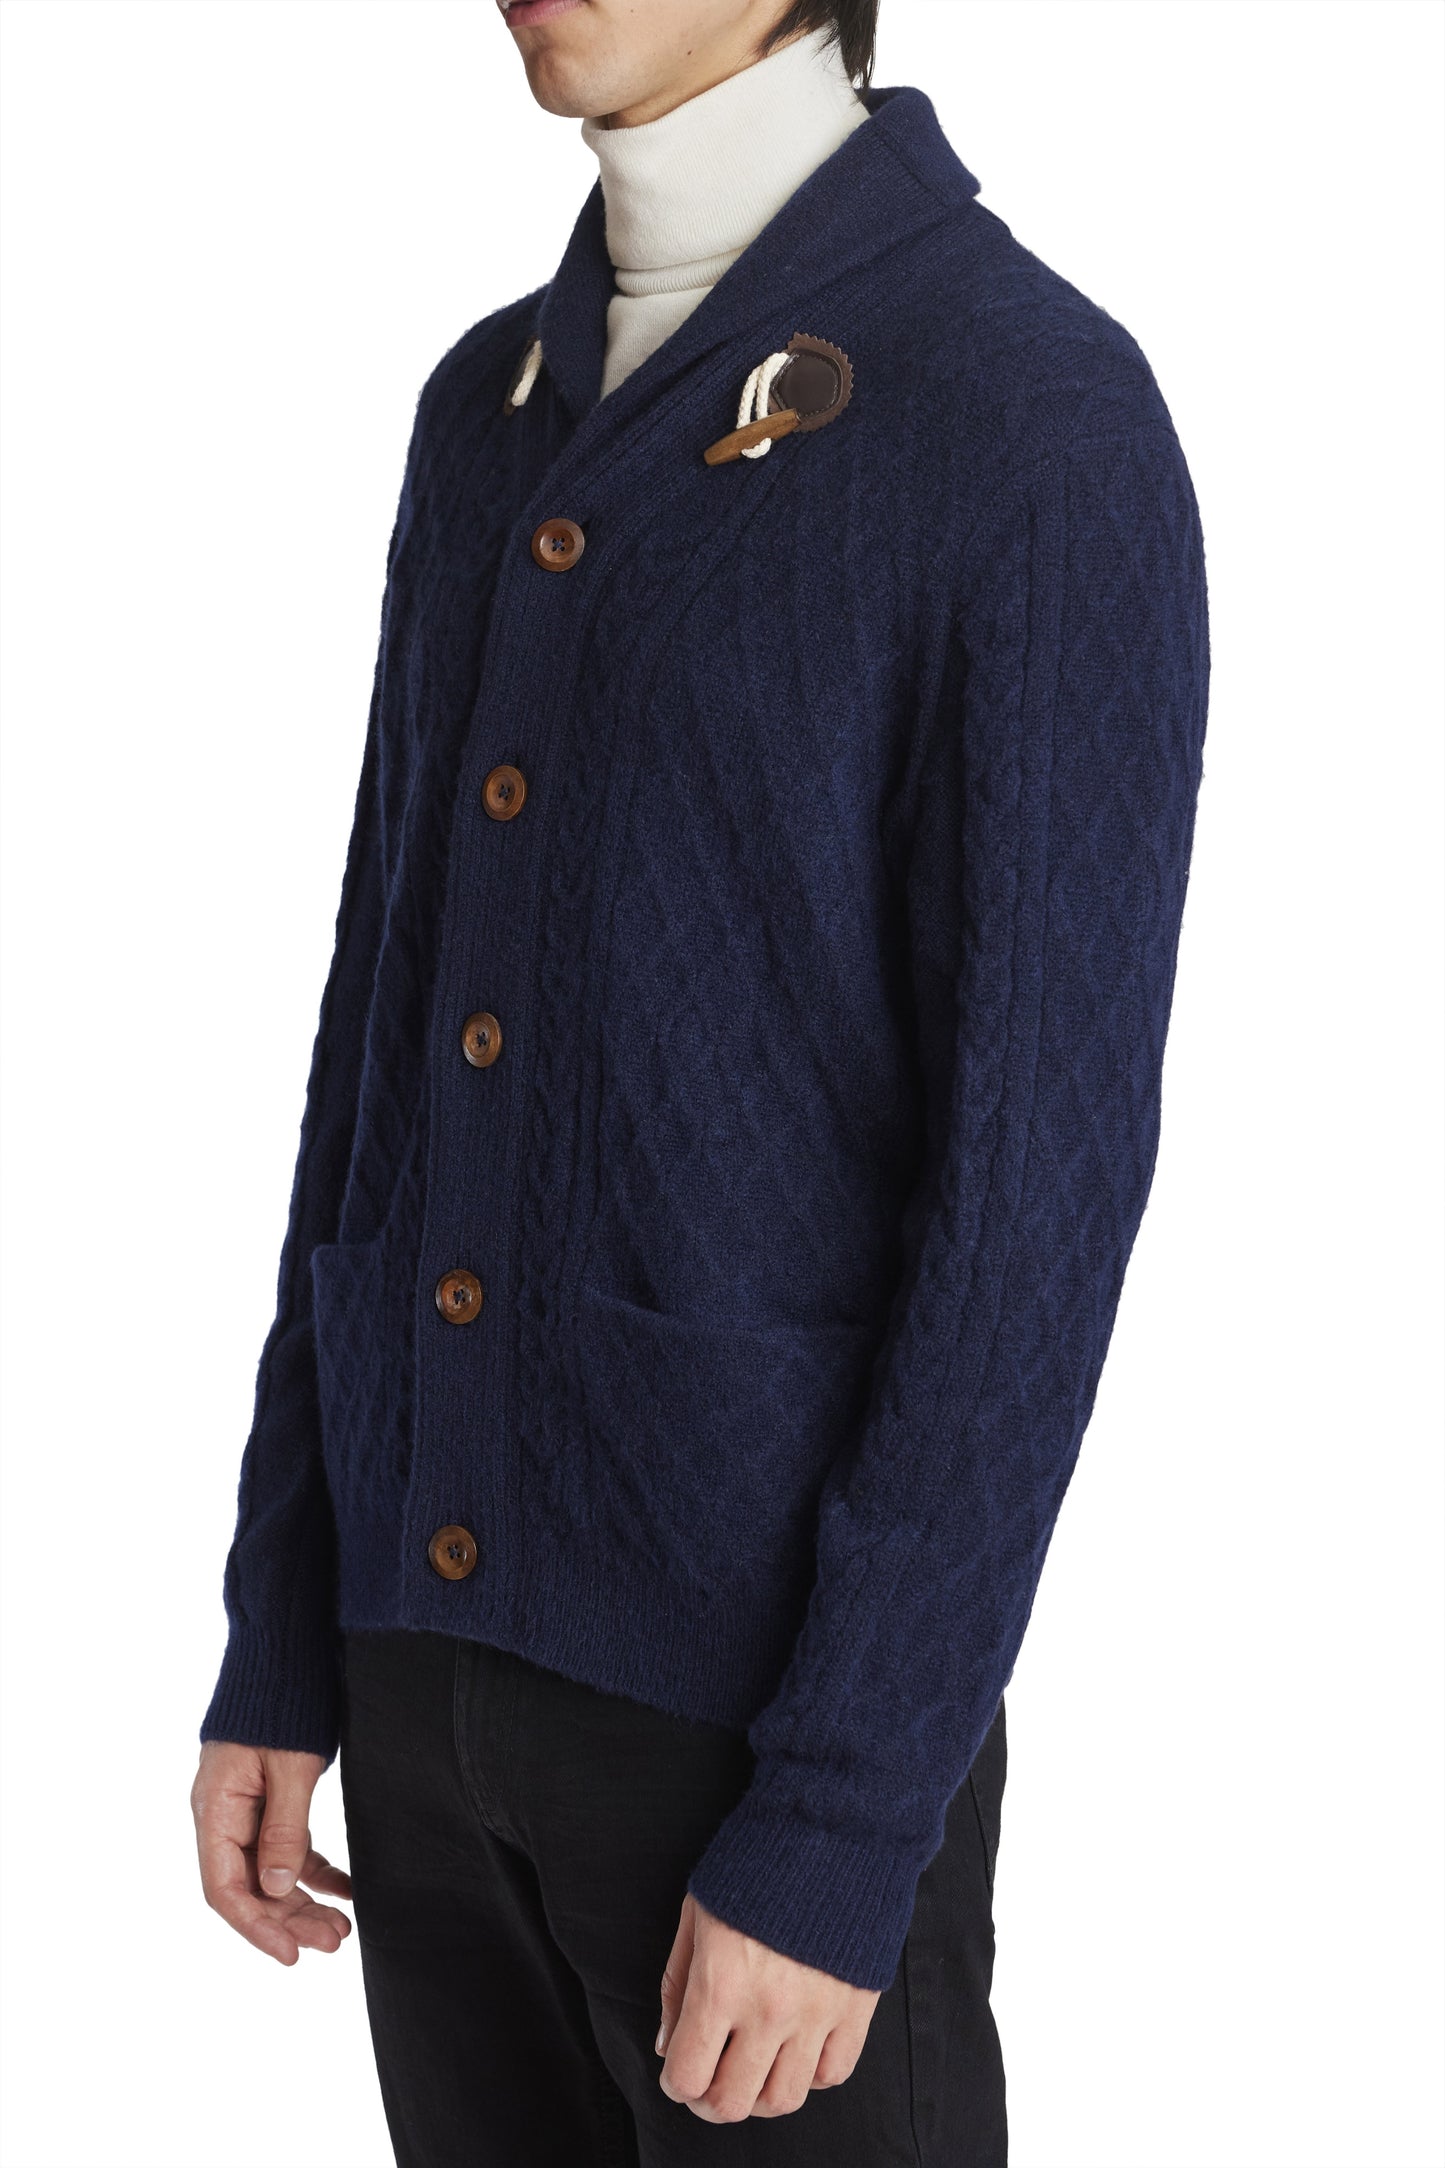 Paisely & Gray Navy Toggle Cardigan Sweater